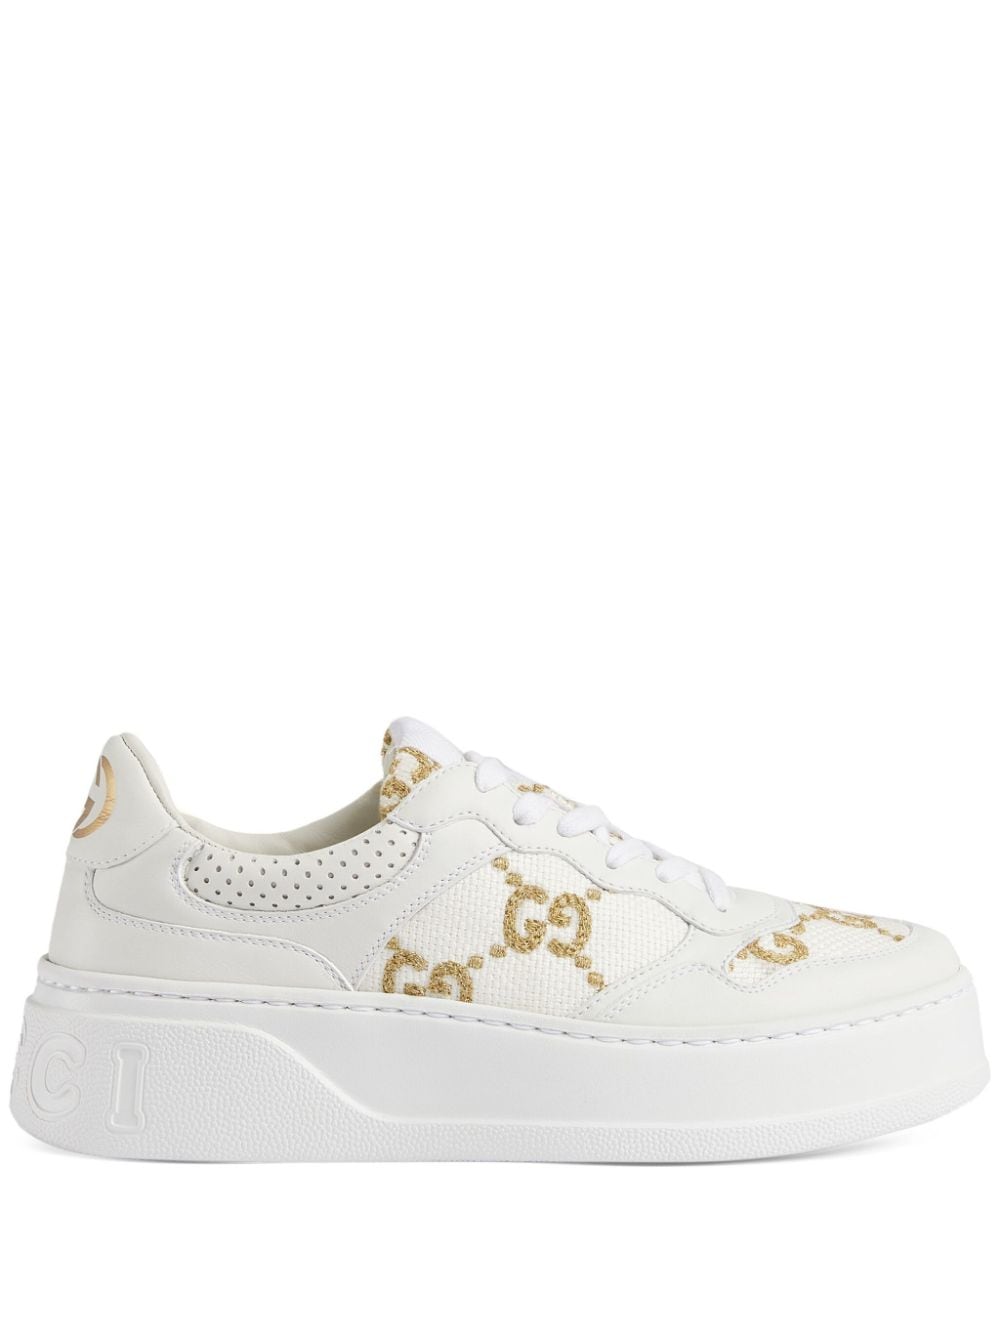 Shop Gucci Gg Supreme Panelled Sneakers In White